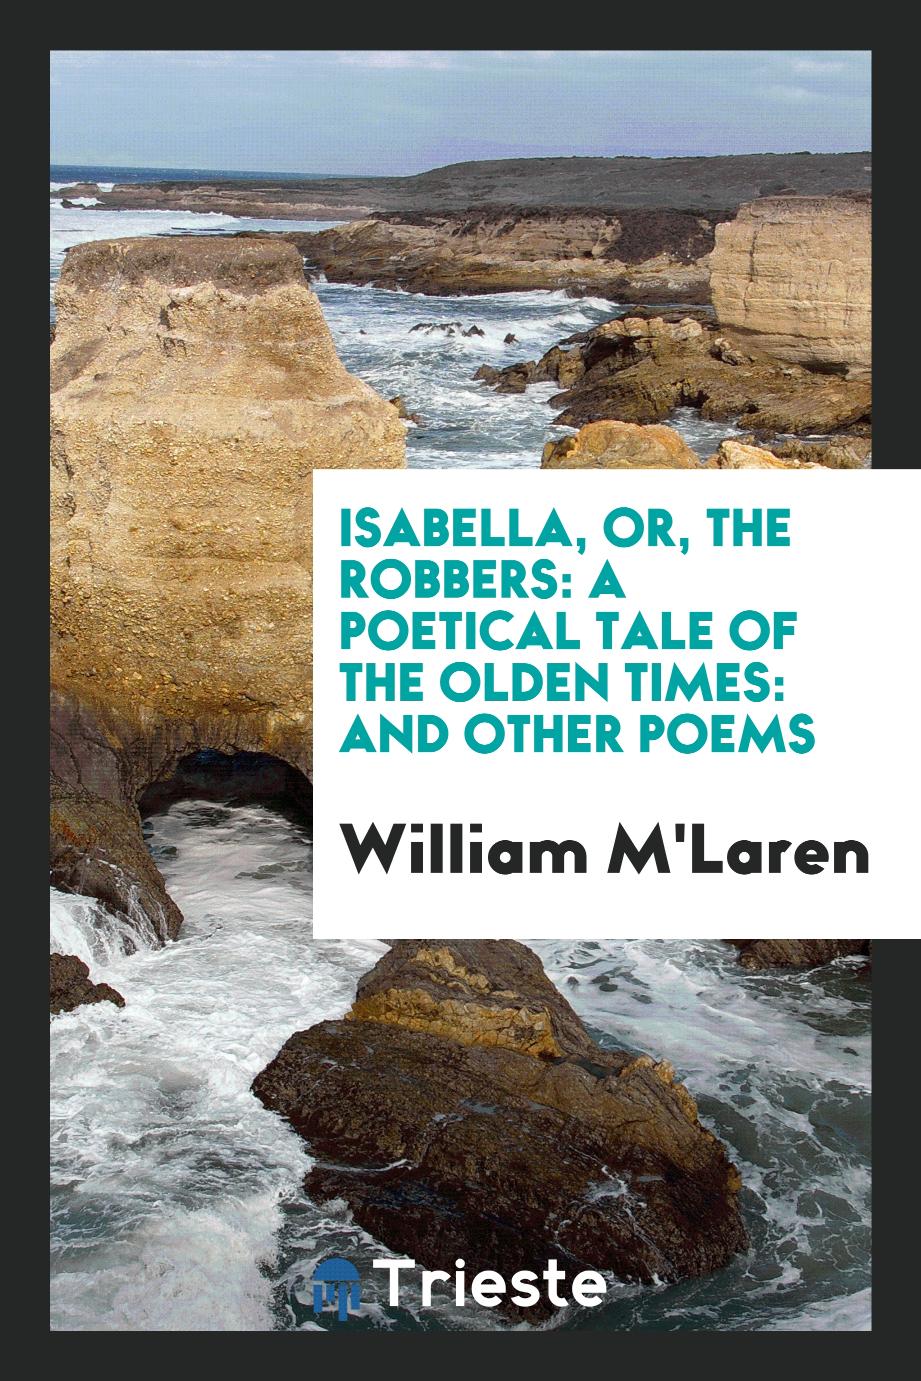 Isabella, or, The robbers: a poetical tale of the olden times: and other poems